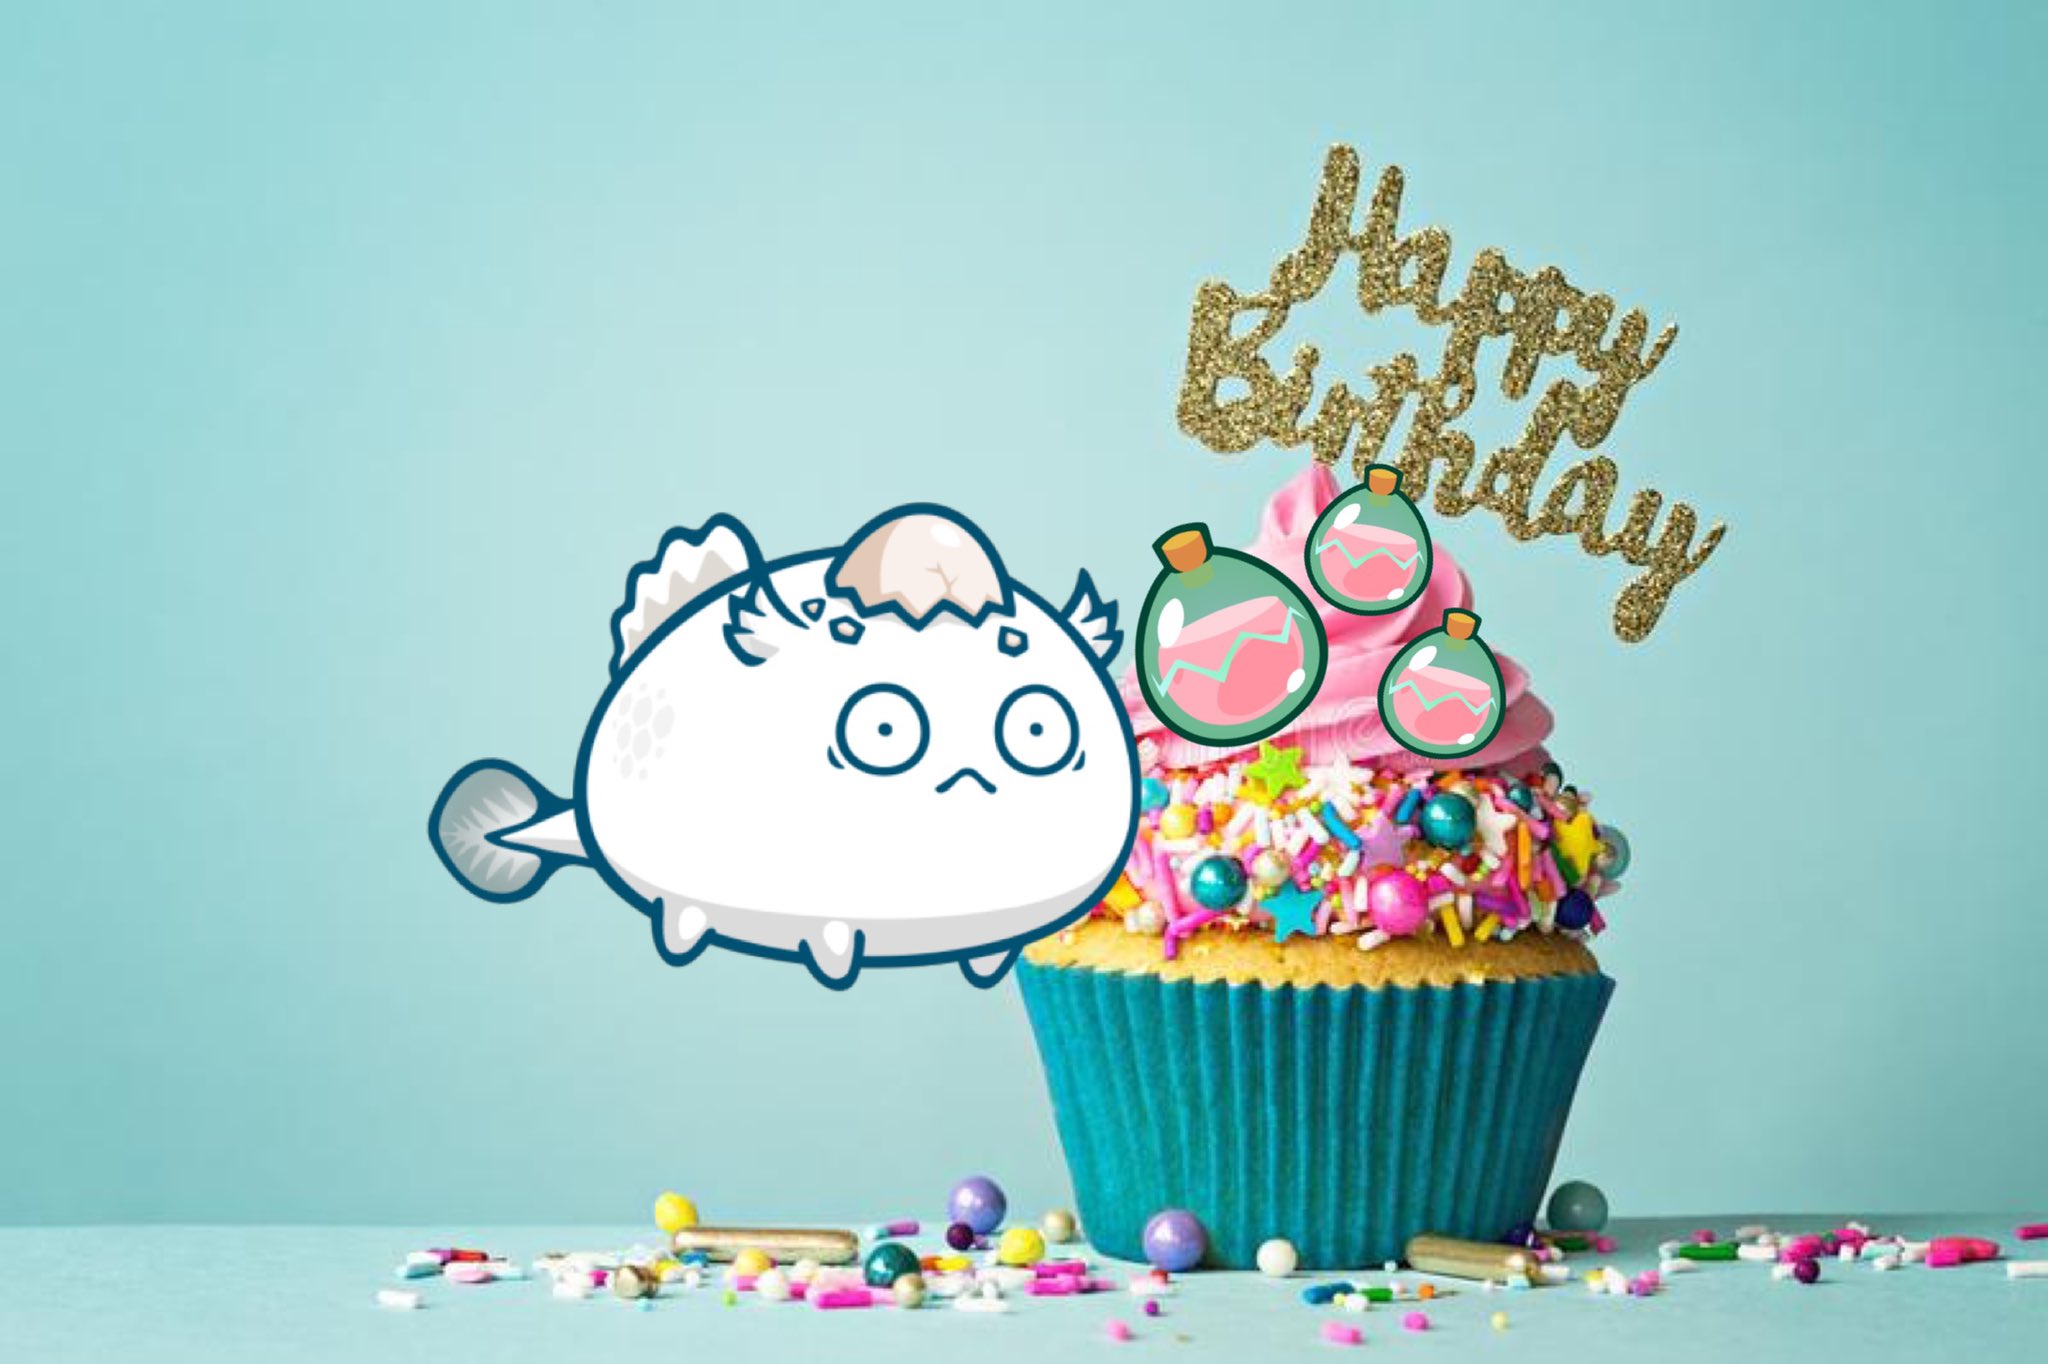 RT cloudwhiteNFT: THE GREAT LUNACIAN  BIRTHDAY BAKE OFF! 🍰  today we celebrate the 4th birthday of @axieinfinity, and the culture that makes us a nation!  submit your axie themed cakes and baked goods in the comments.  72 hours to enter.  prizes:  🥇 5 $axs 🥈 100 $ron 🥉 11,500 $slp [twitter.com] [twitter.com] [pbs.twimg.com]